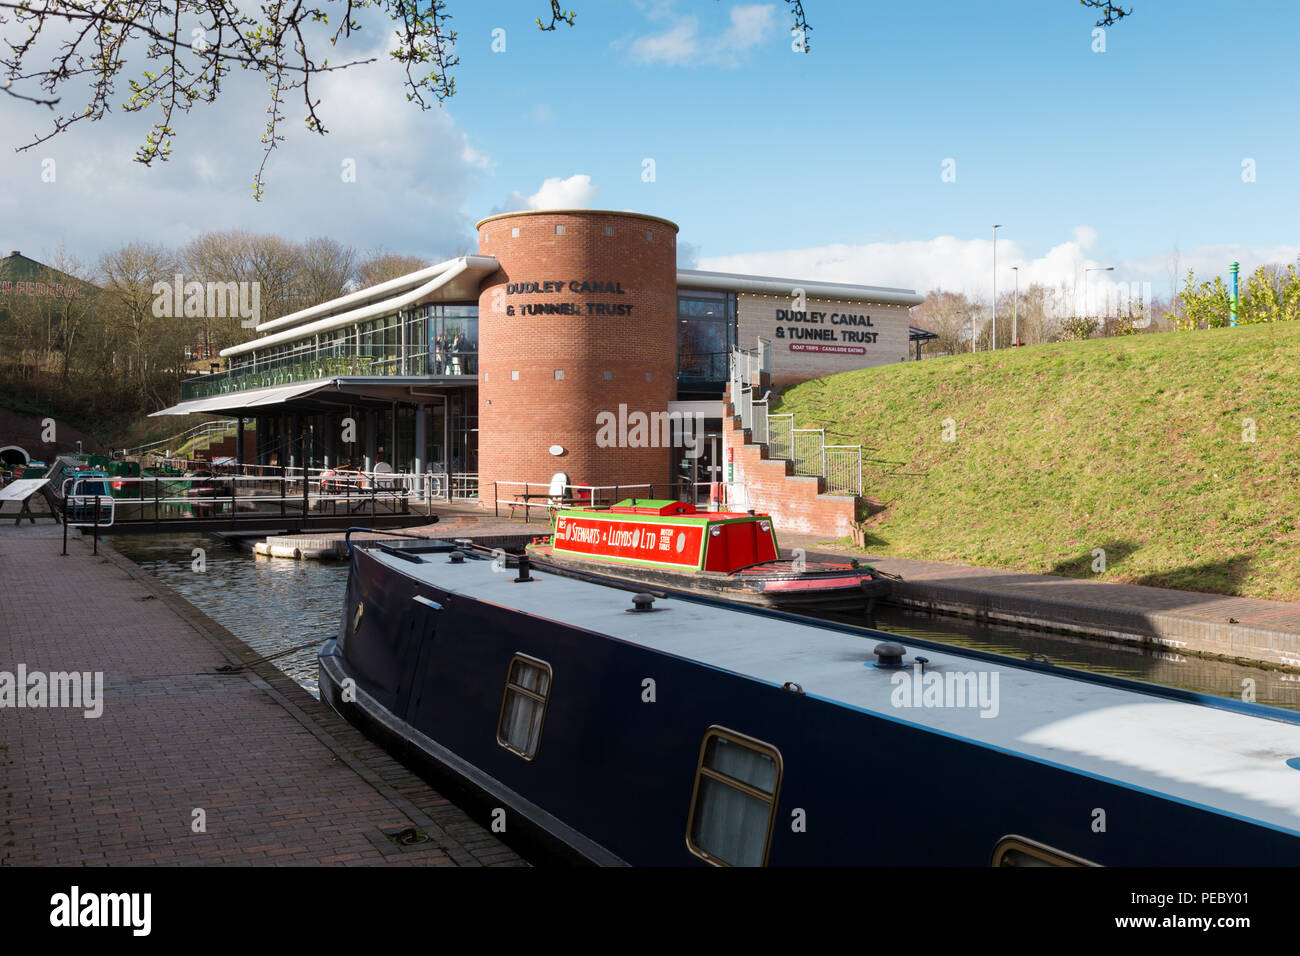 Dudley Canal and Tunnel trust, Dudley, UK Stock Photo